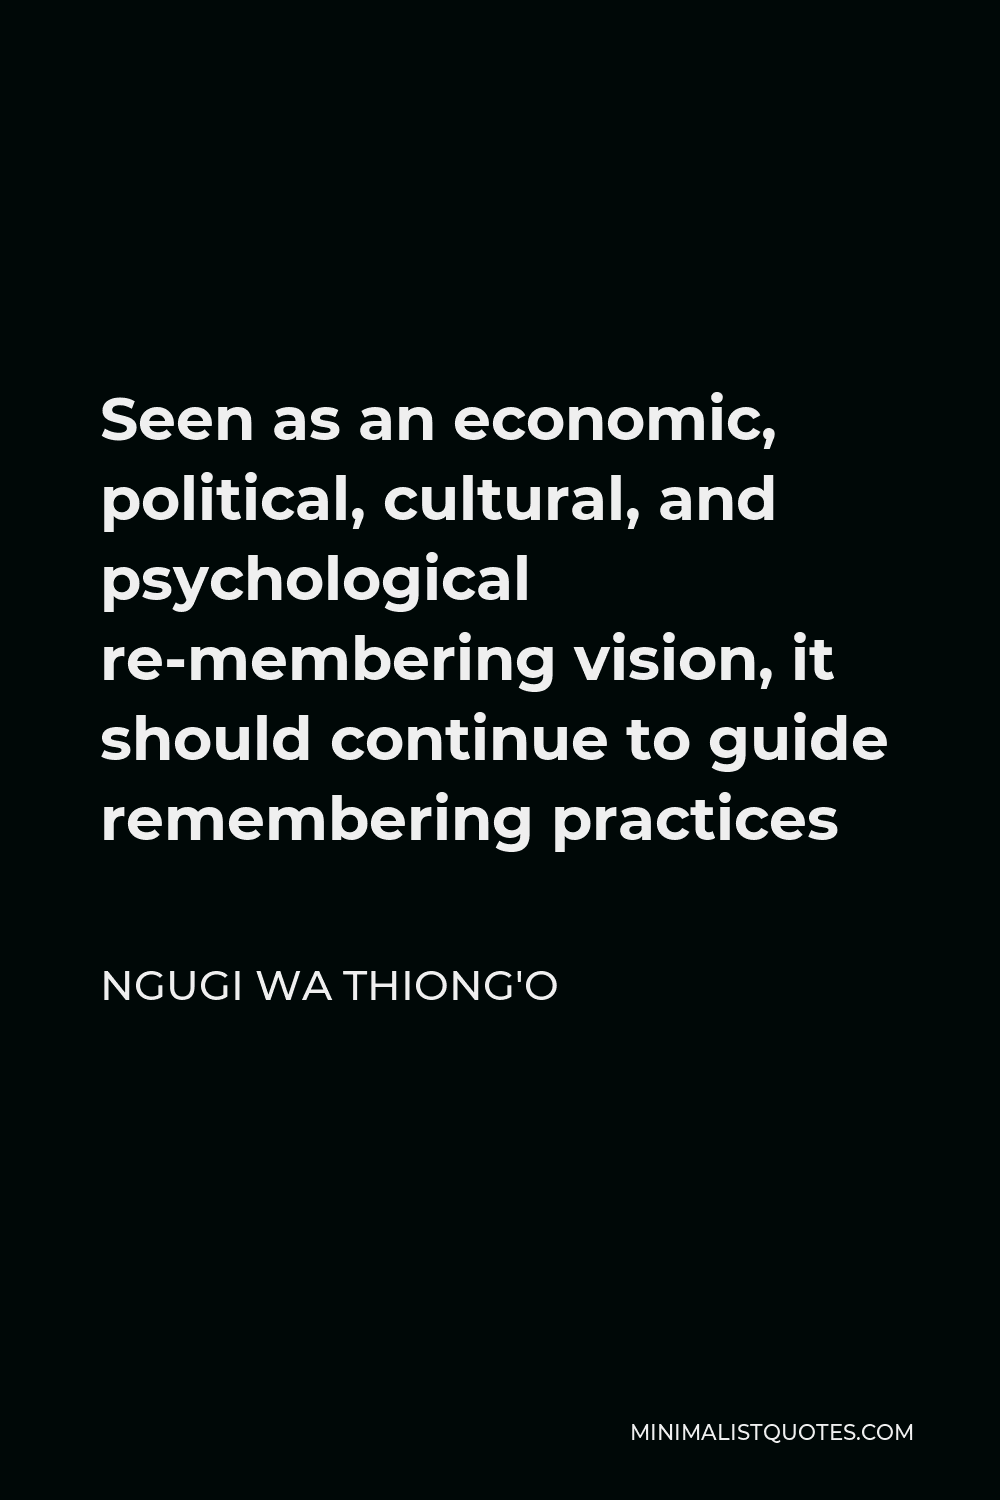 Ngugi wa Thiong'o Quote - Seen as an economic, political, cultural, and psychological re-membering vision, it should continue to guide remembering practices